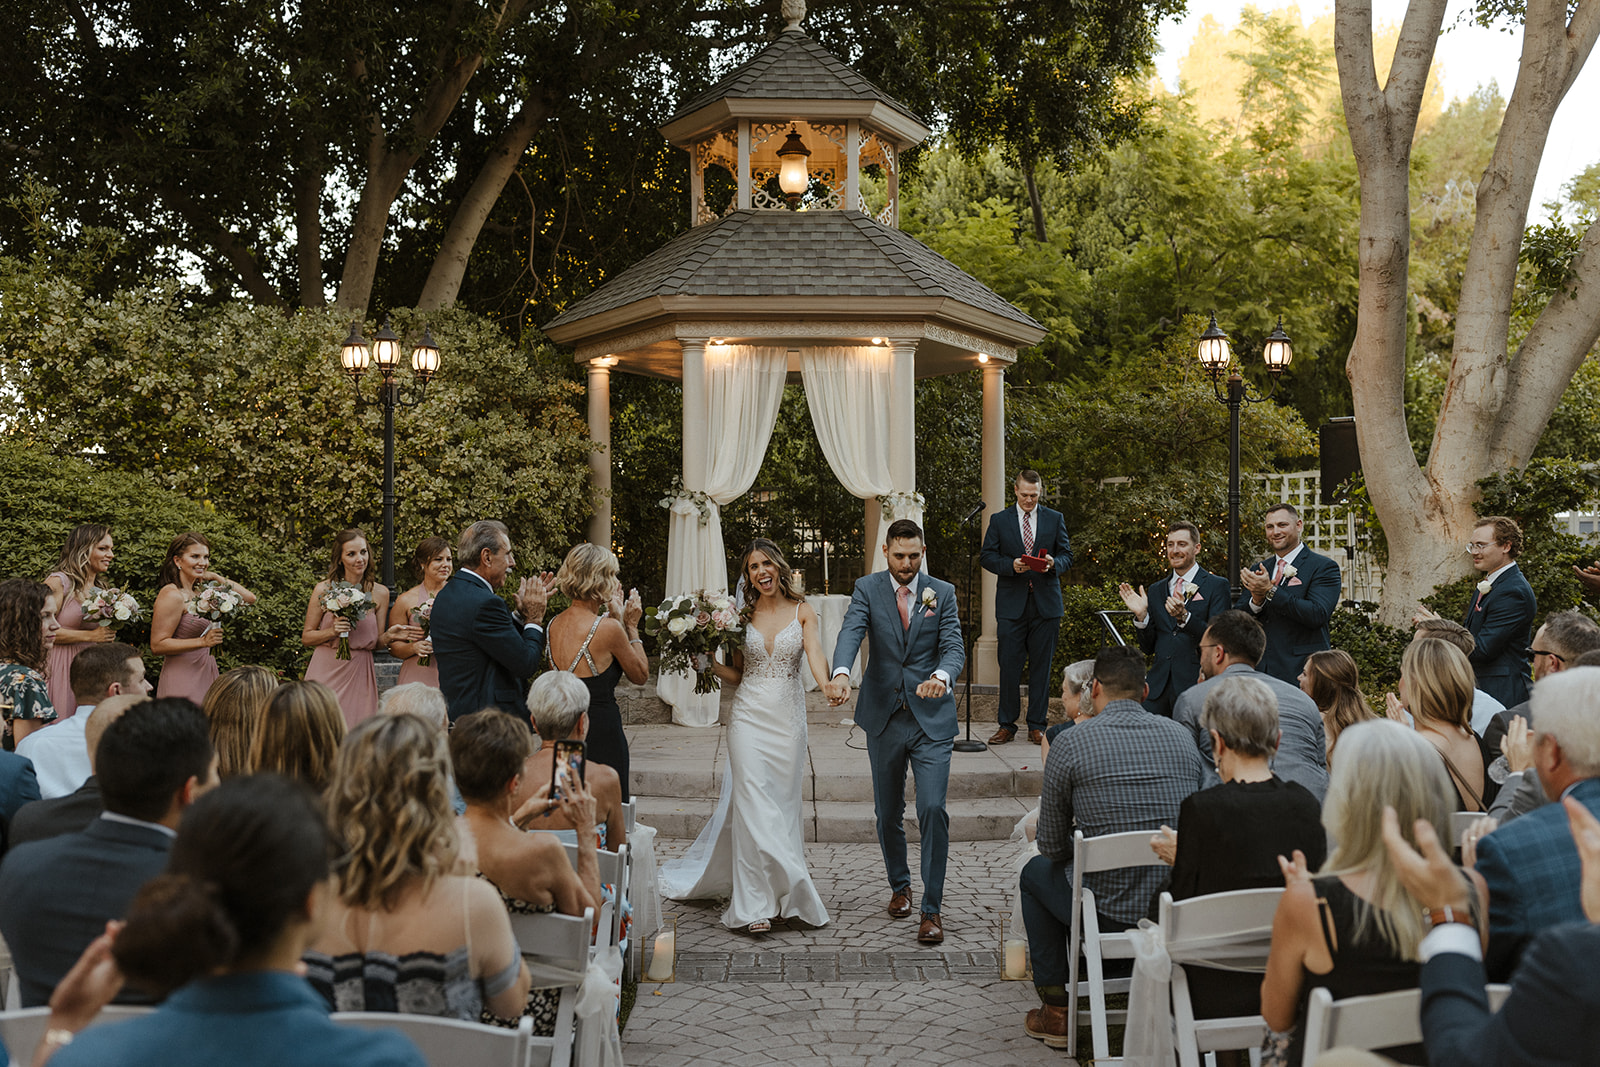 Stunning bride and groom exit their dreamy The Wright House Garden Reception Center wedding!